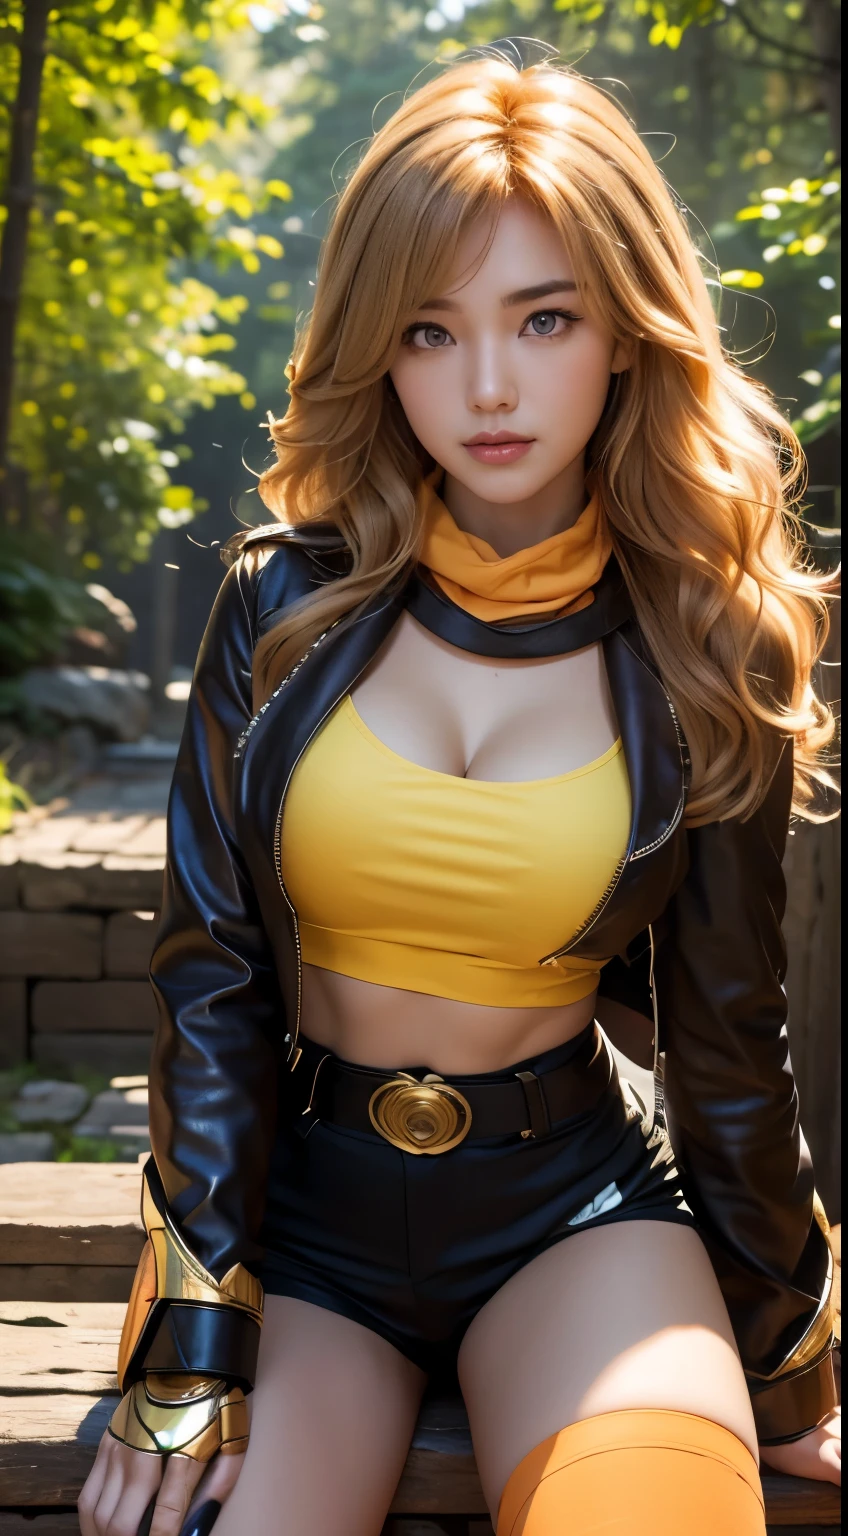 Yang Xiao Long (\Ruby\), 1 girl, highest quality, High resolution, masterpiece, High resolution, sharp: 1.2, Perfect body beauty: 1.4, Slim Abs: 1.2, Highly detailed face and skin texture, Fine grain, double eyelid, Looking into the camera, Purple eyes, Long Hair, Forest Background, Perfect lighting,(bright), leather jacket, Hyperrealism, Knee socks, Ruby, wavy bright golden hair, Mechanical gauntlet, Tan shorts, Orange neckband, Tea belt, Yang Xiao Long